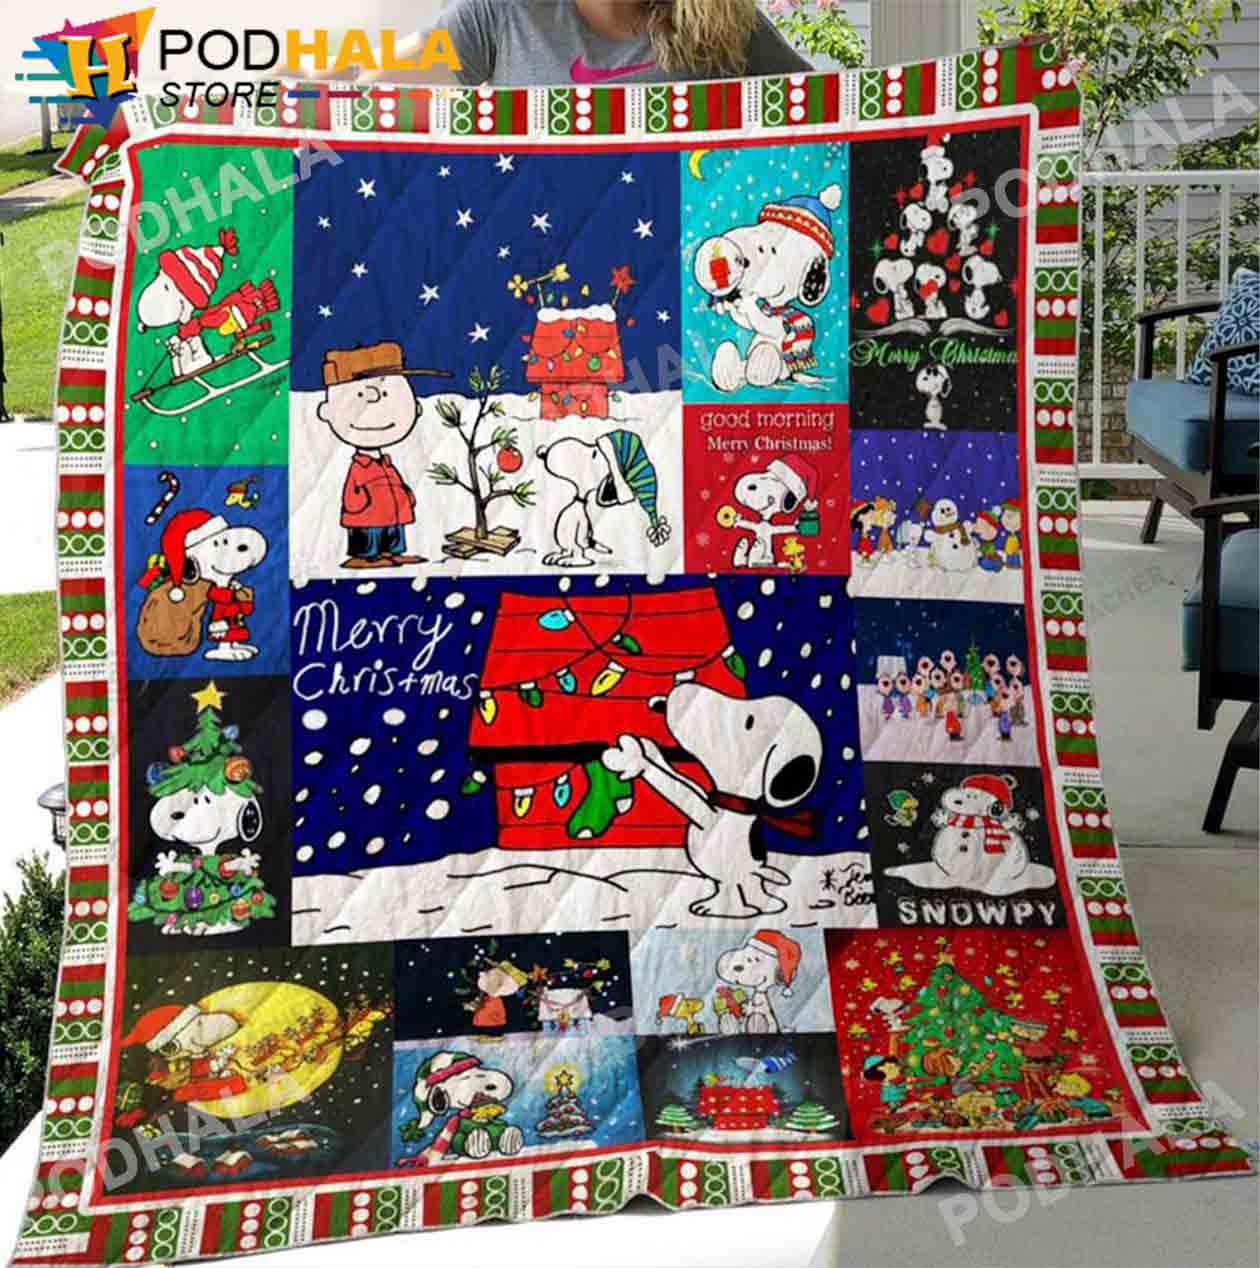 Peanuts Christmas Blanket, Christmas Trees Snoopy Doghouse Blanket